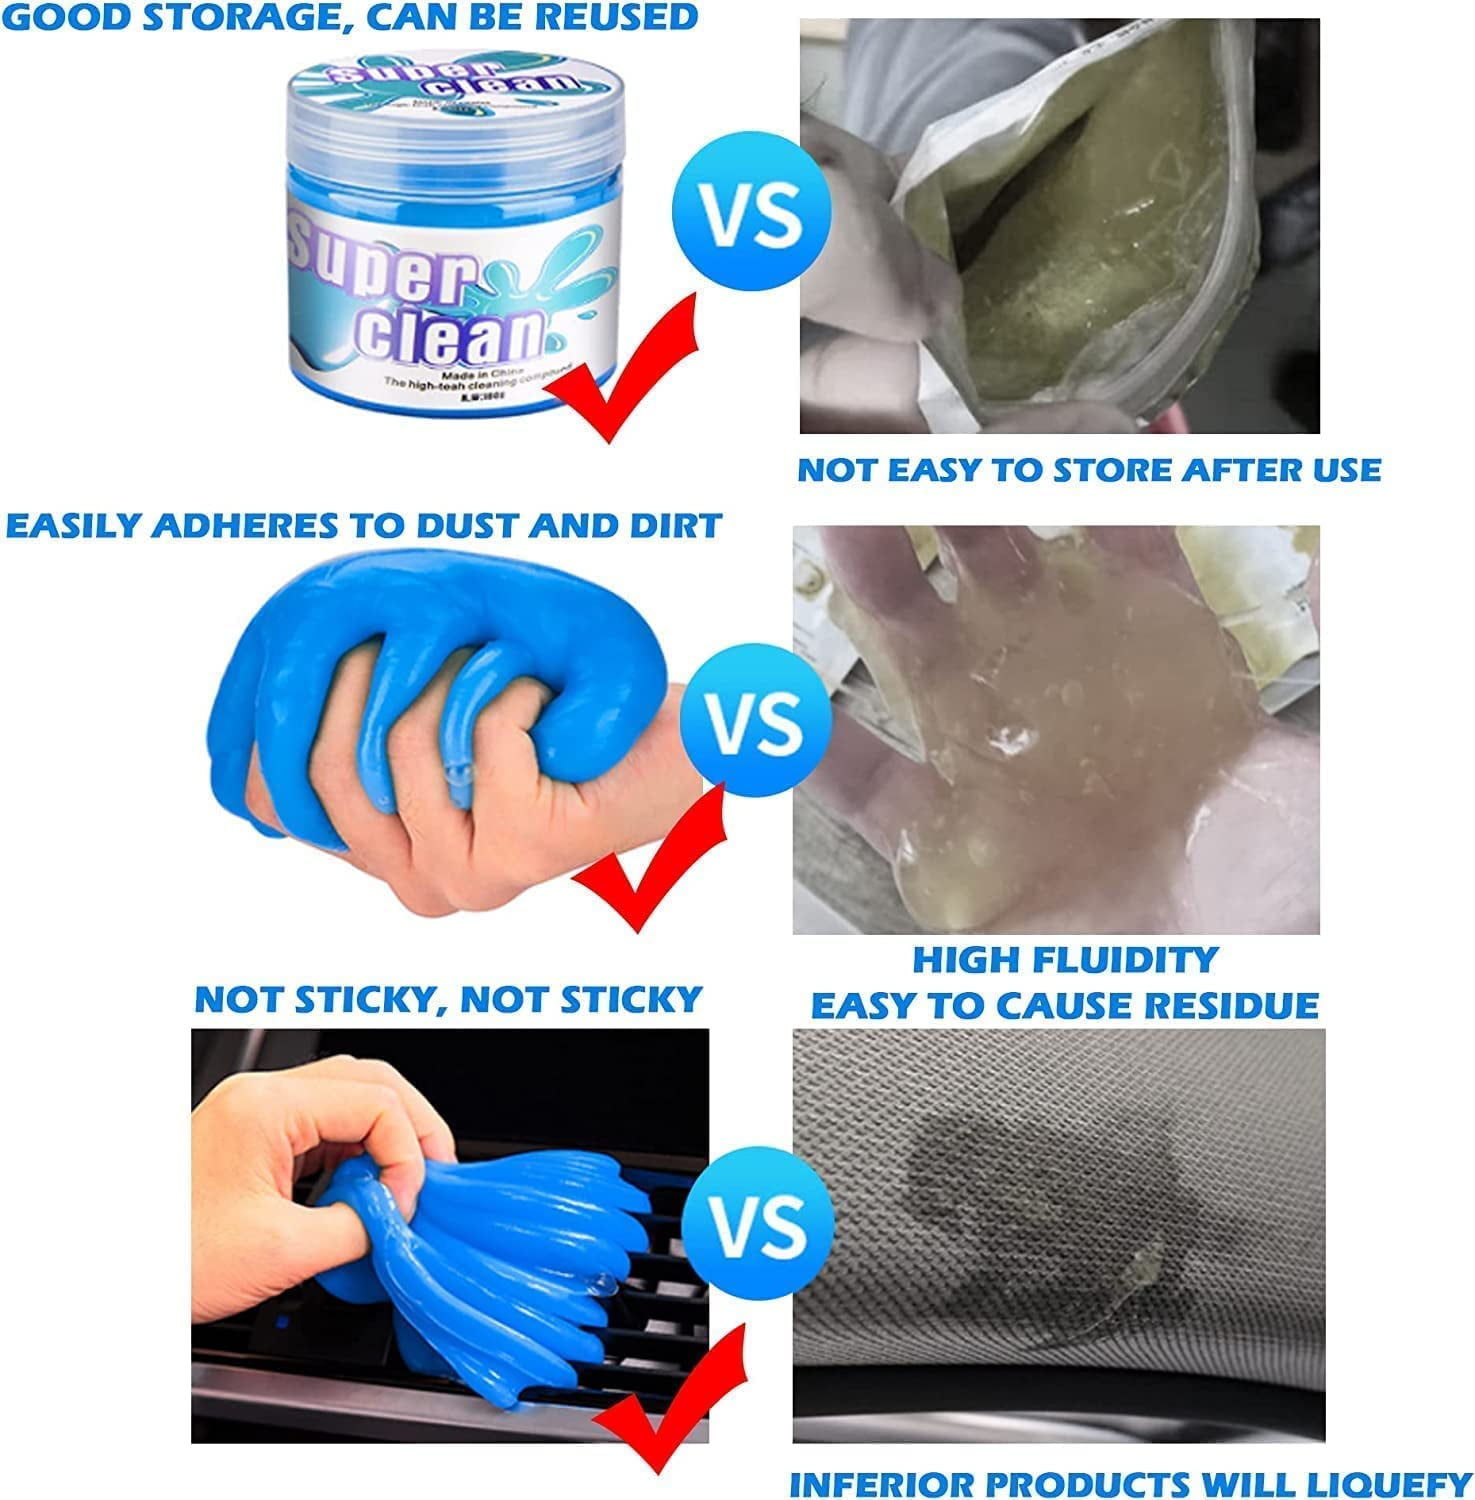 Magic Dust Cleaning Gel For Cars And Home Detailing, Dirt Removal, And Glue  For Auto Air Vent, Interior, Office, Keyboard, Windows, Laptop Essential  Cleaning Hand Tools From Tinamao910607, $4.28